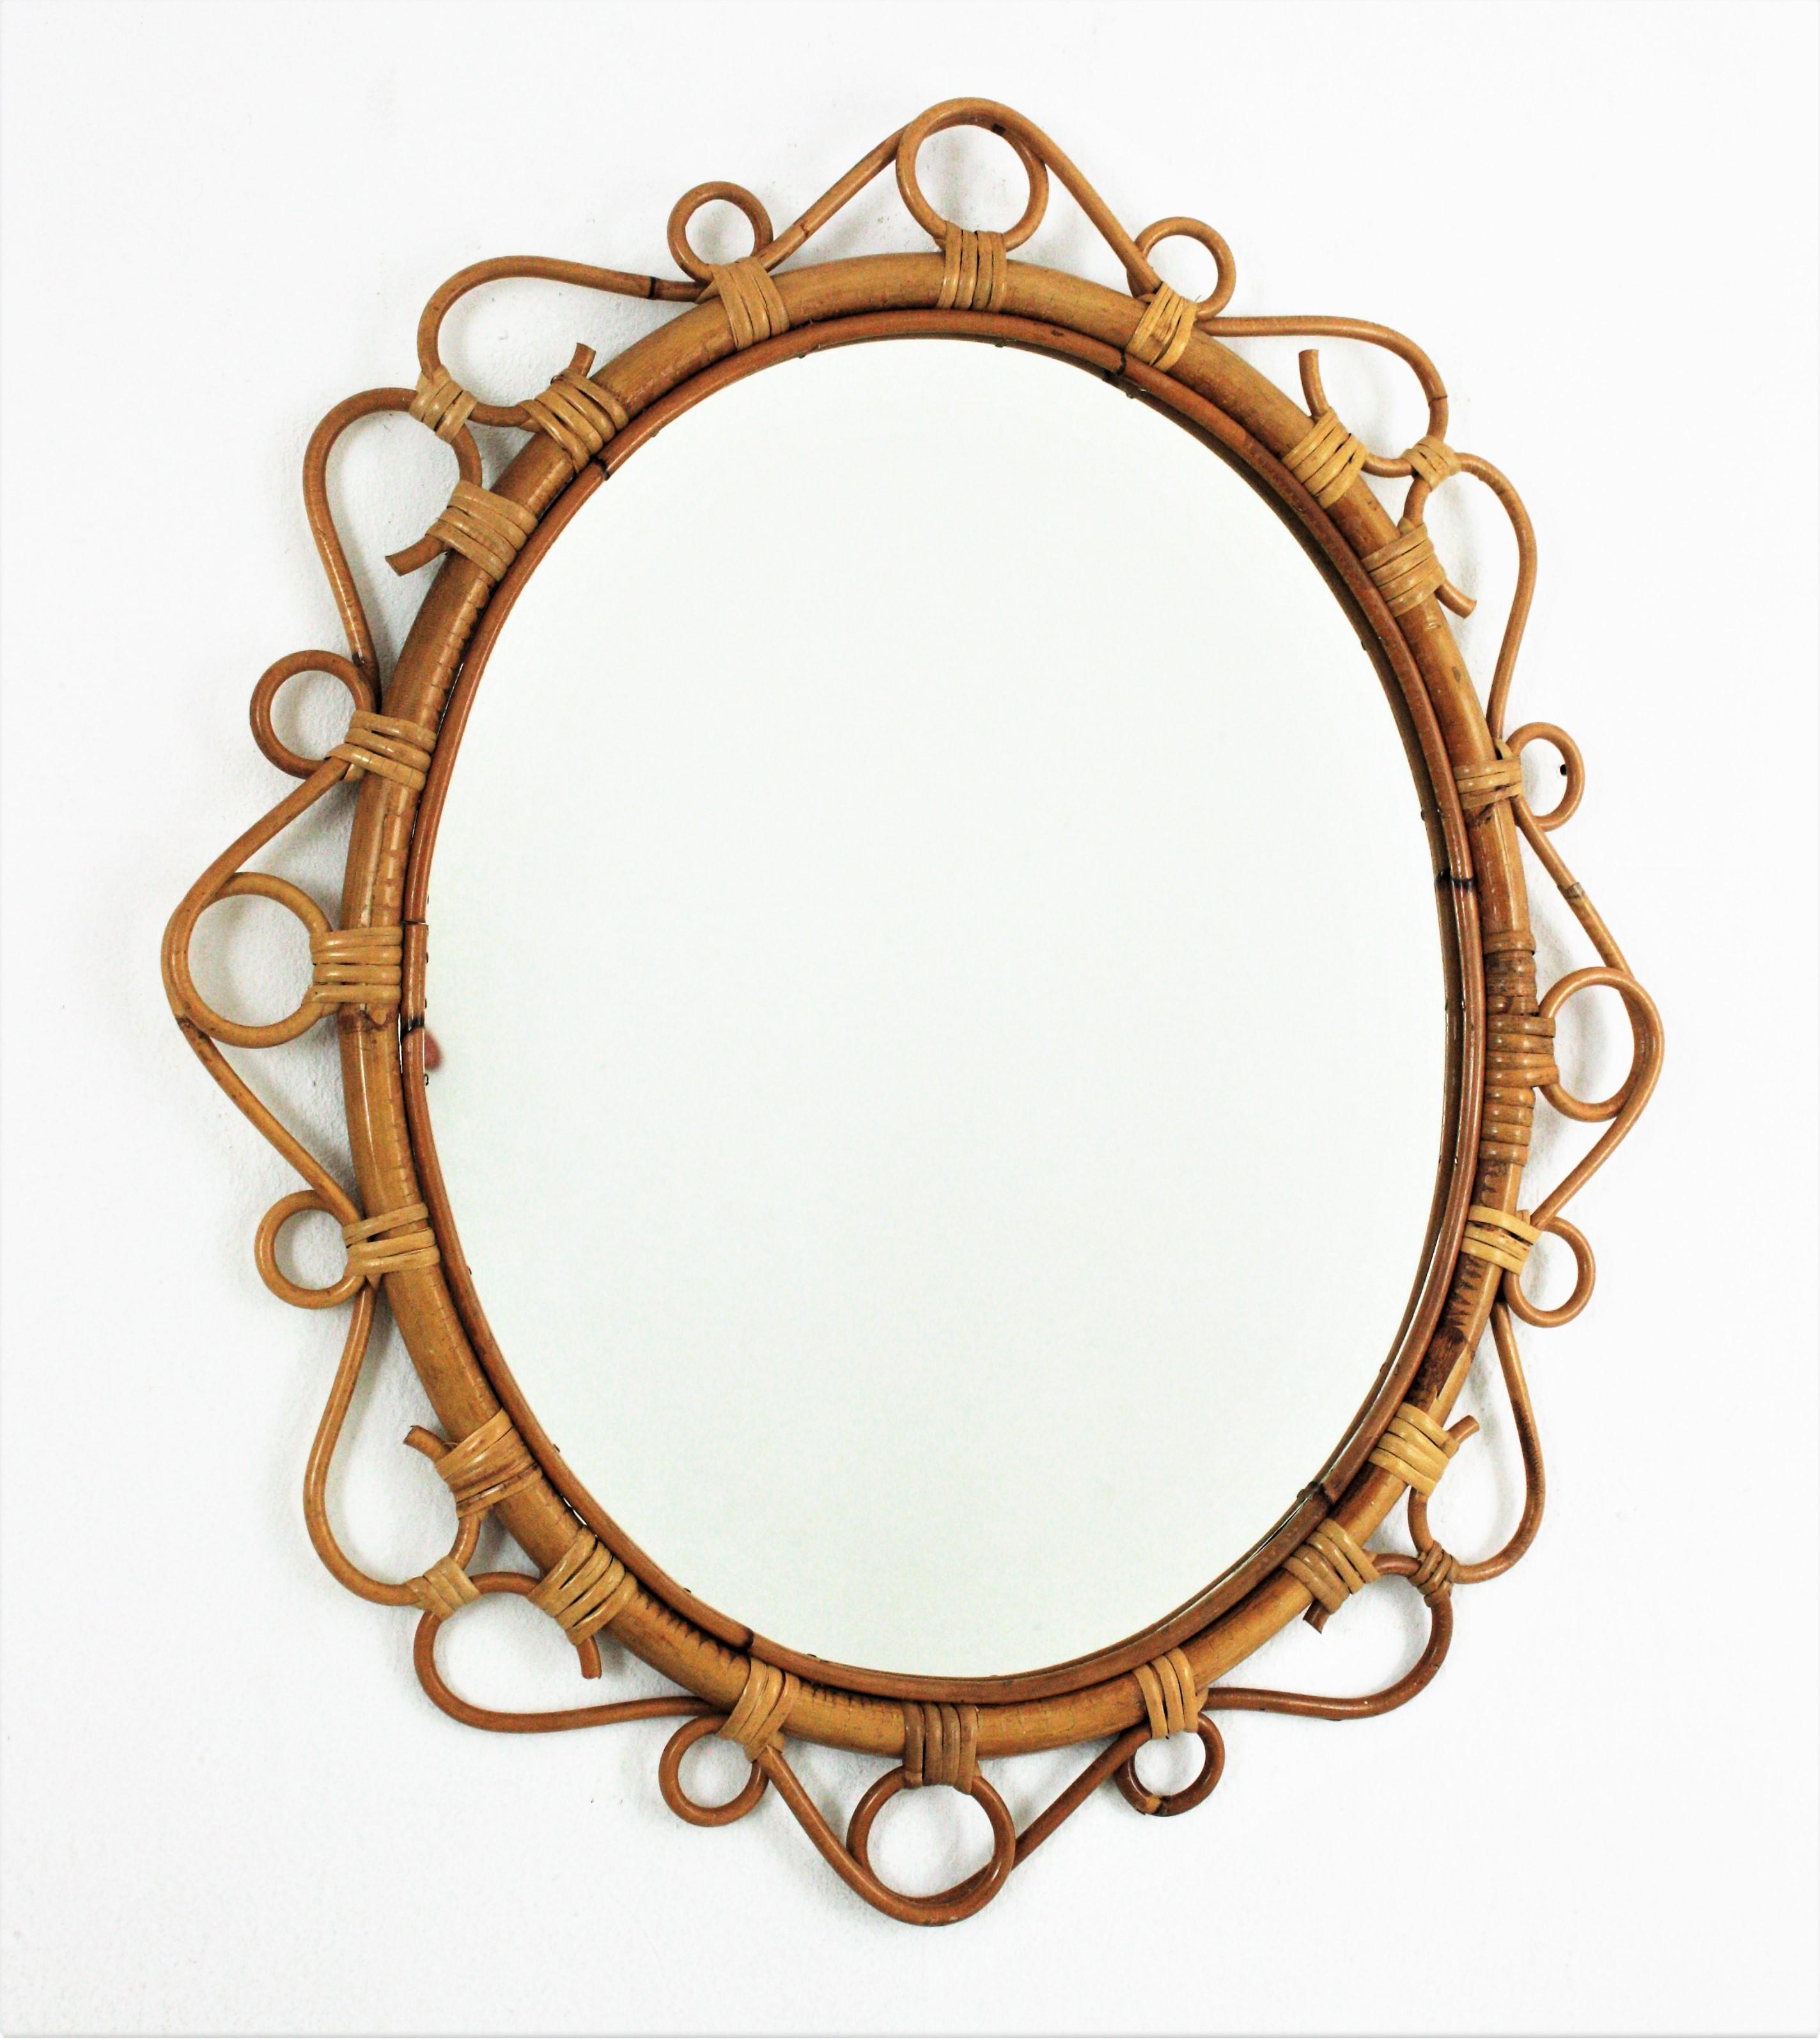 Eye-catching handcrafted bamboo and rattan oval mirror with scroll detailing surrounding the frame. Spain, circa 1960s.
This Mediterranean wall mirror features an oval bamboo frame surrounded by rattan scroll and circle decorations.
It will add a